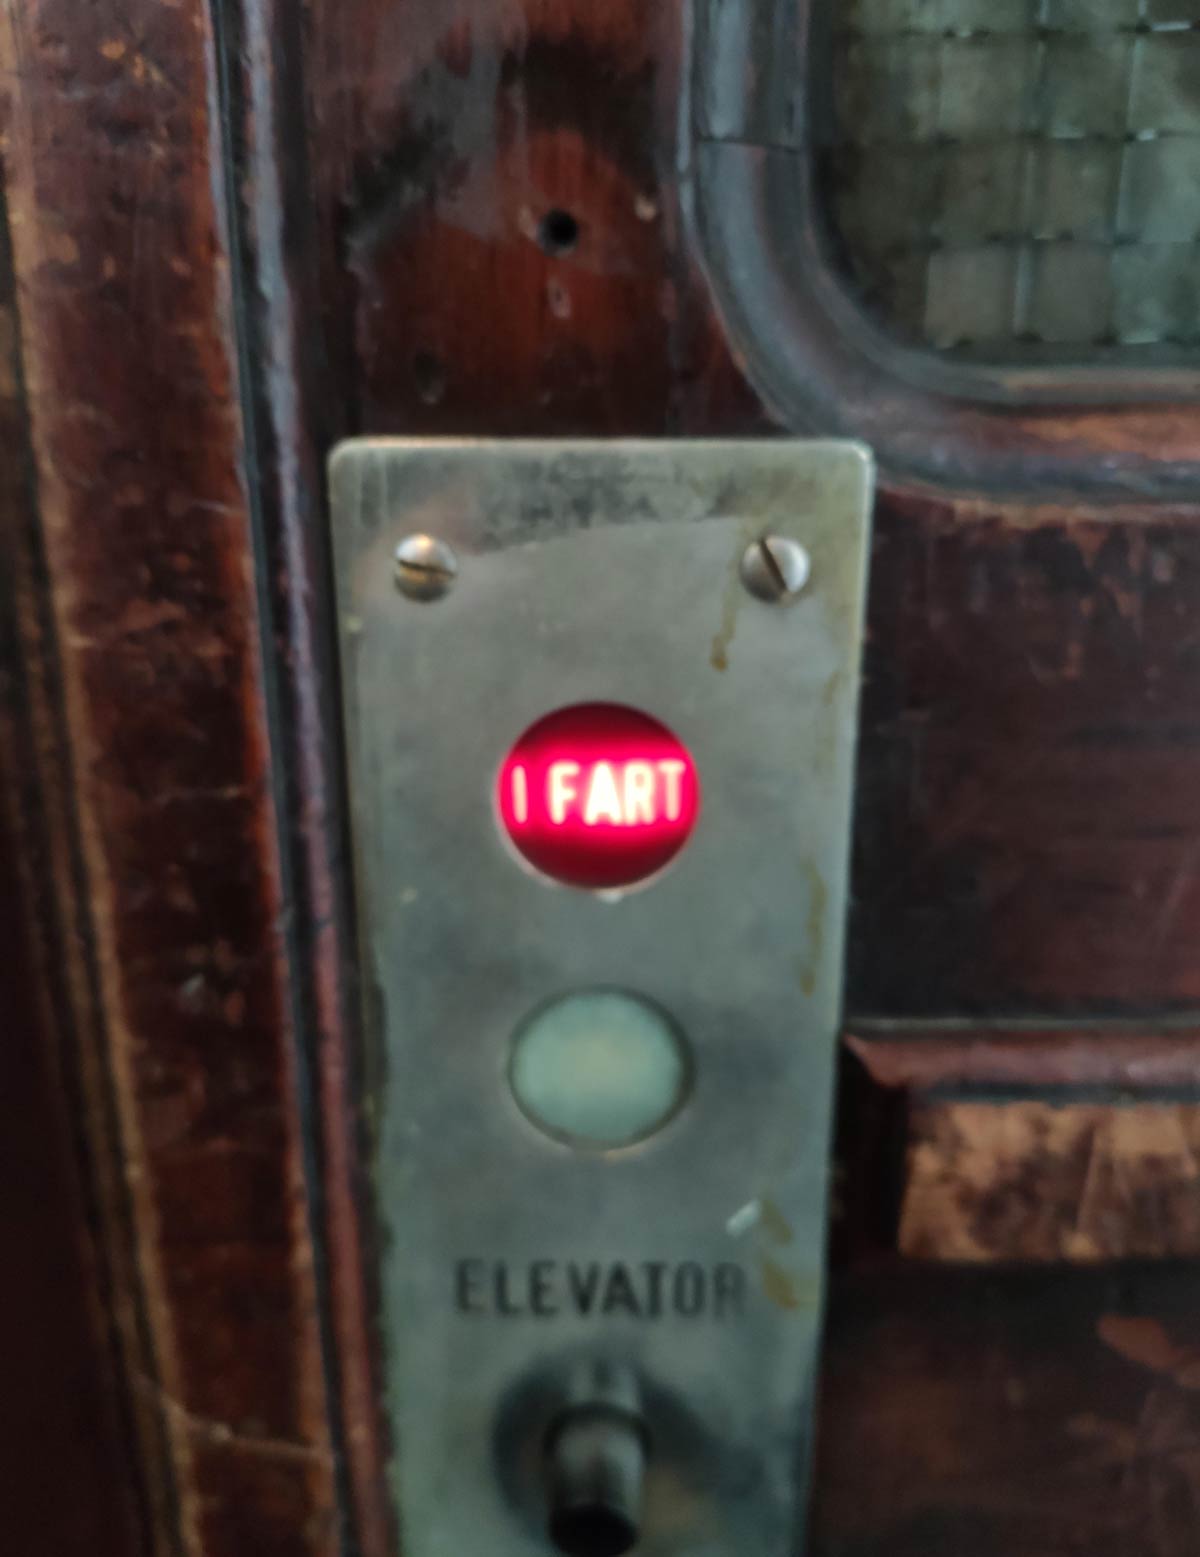 A warning from the elevator